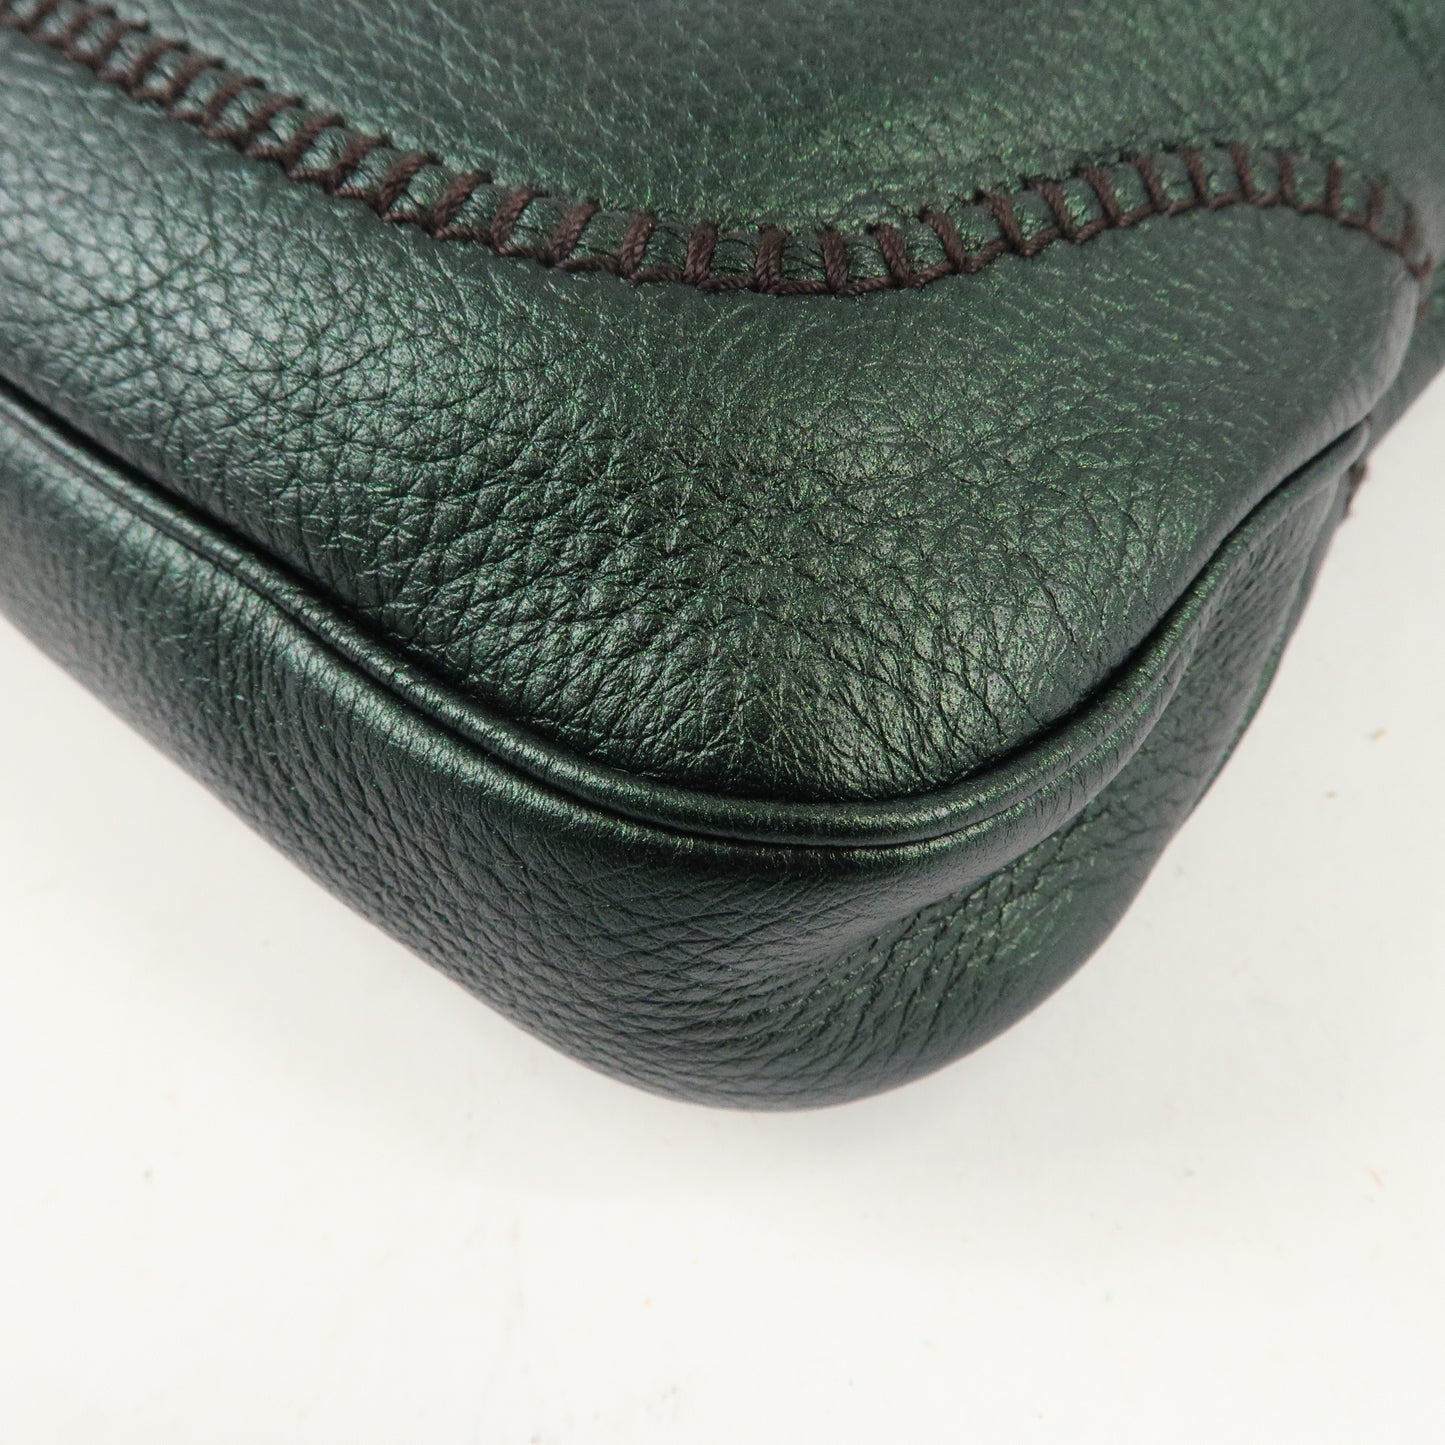 GUCCI New Jackie Bamboo Leather 2Way Shoulder Bag Green 219725Used F/S